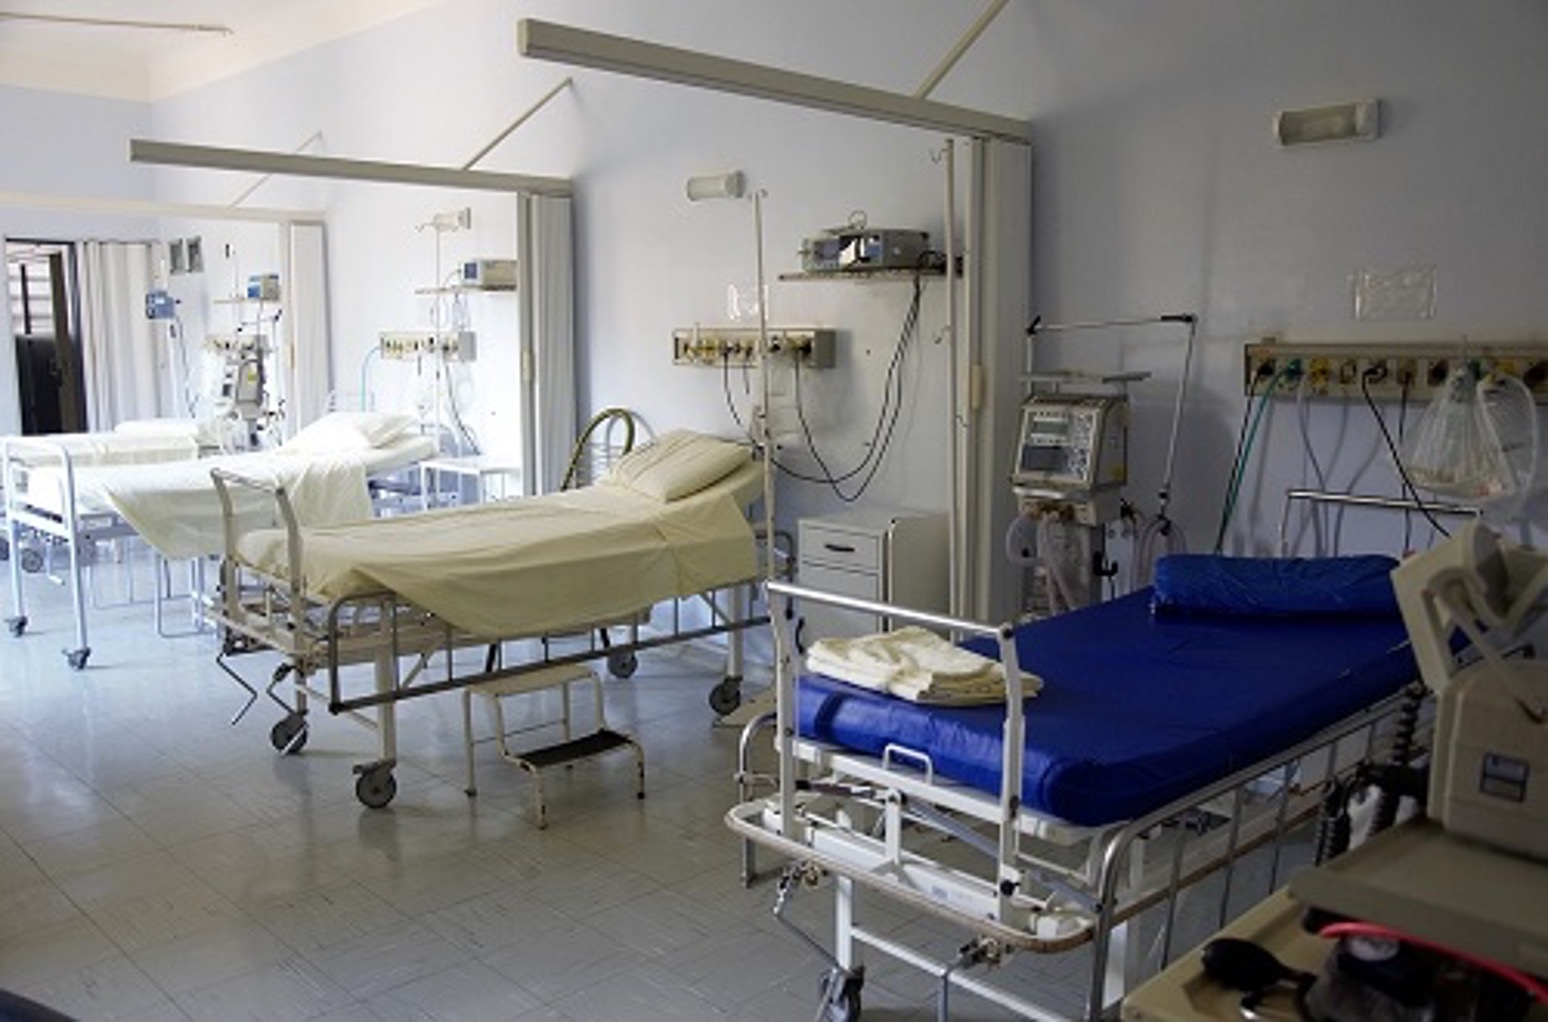 Photograph of a hospital room with four empty beds and equipment ready for an emergency situation..